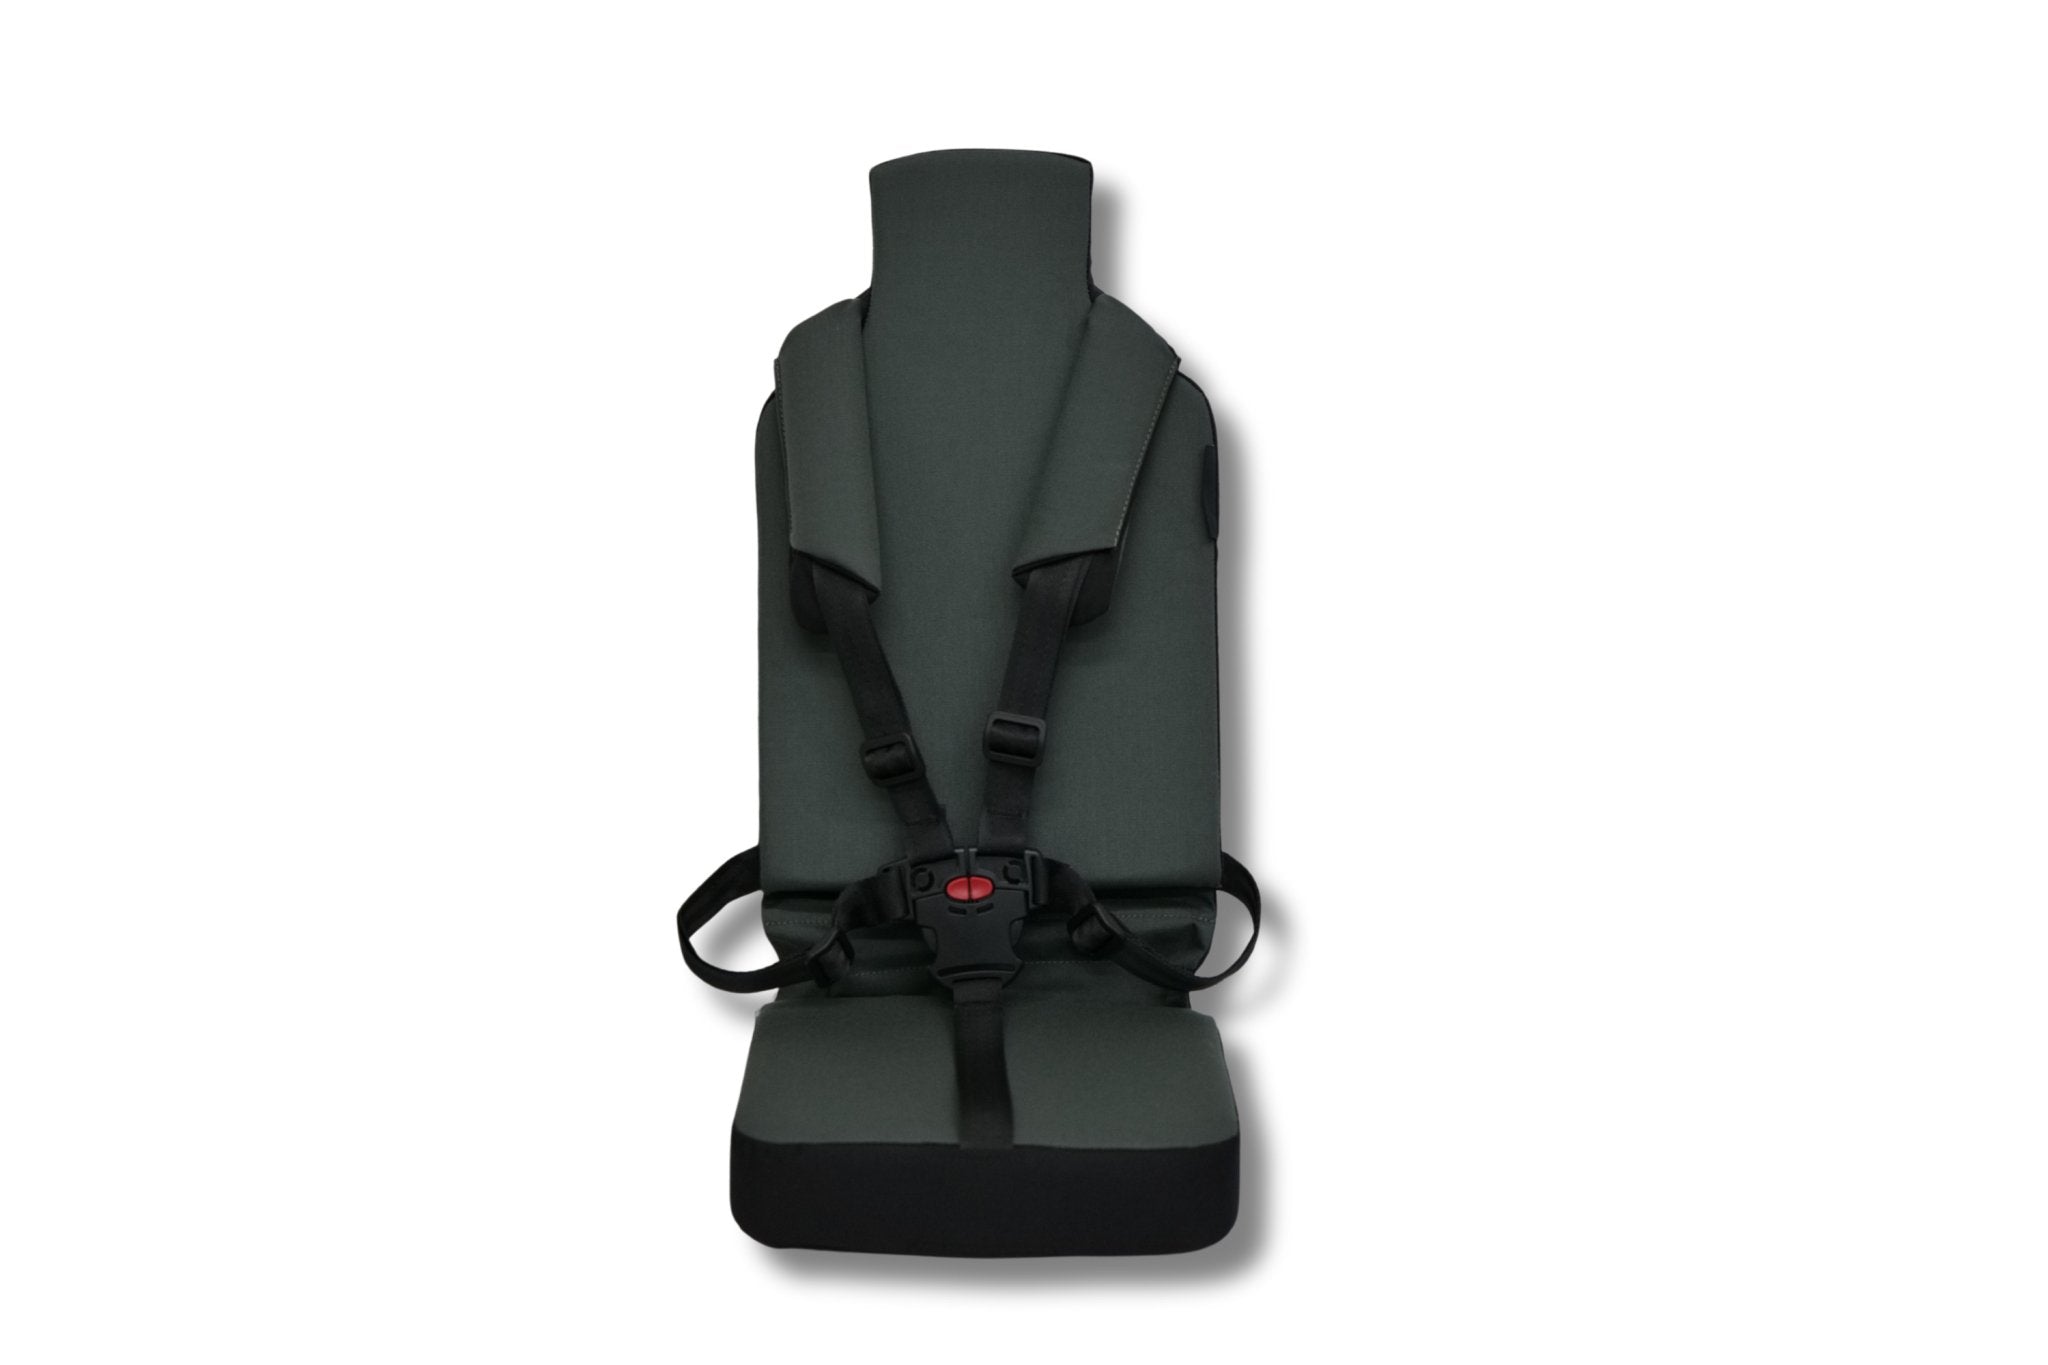 Riese and Muller Single child seat Load/Packster - Dutch Cargo (AU) - Riese and Muller Accessories - Accessories - Riese and Muller Single child seat Load/Packster